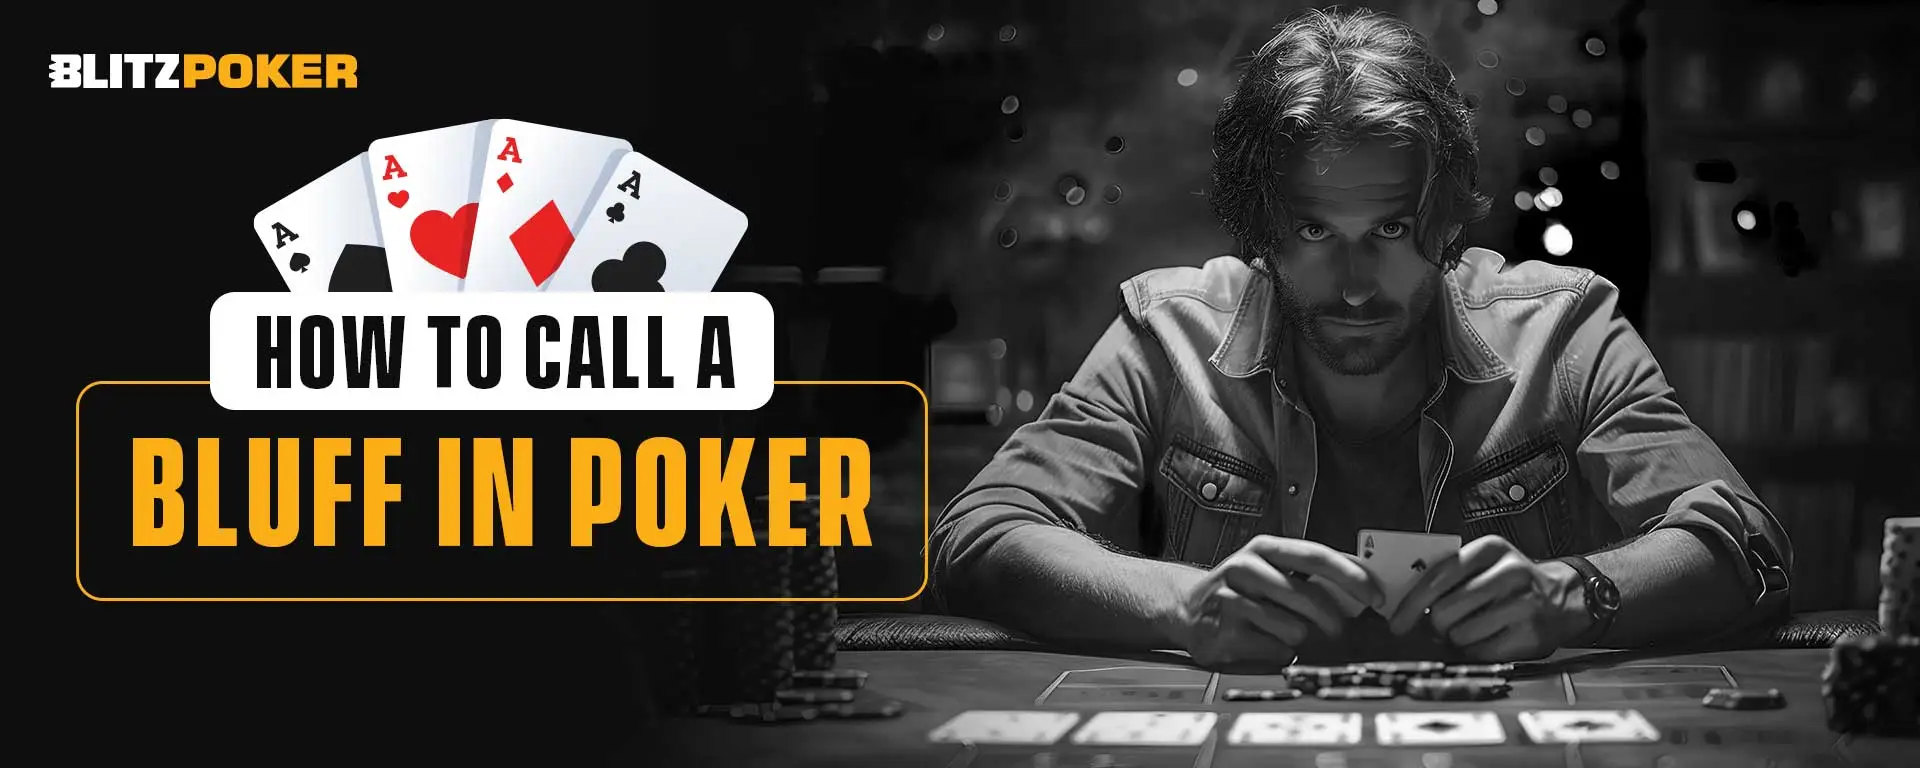 How to Call a Bluff in Poker